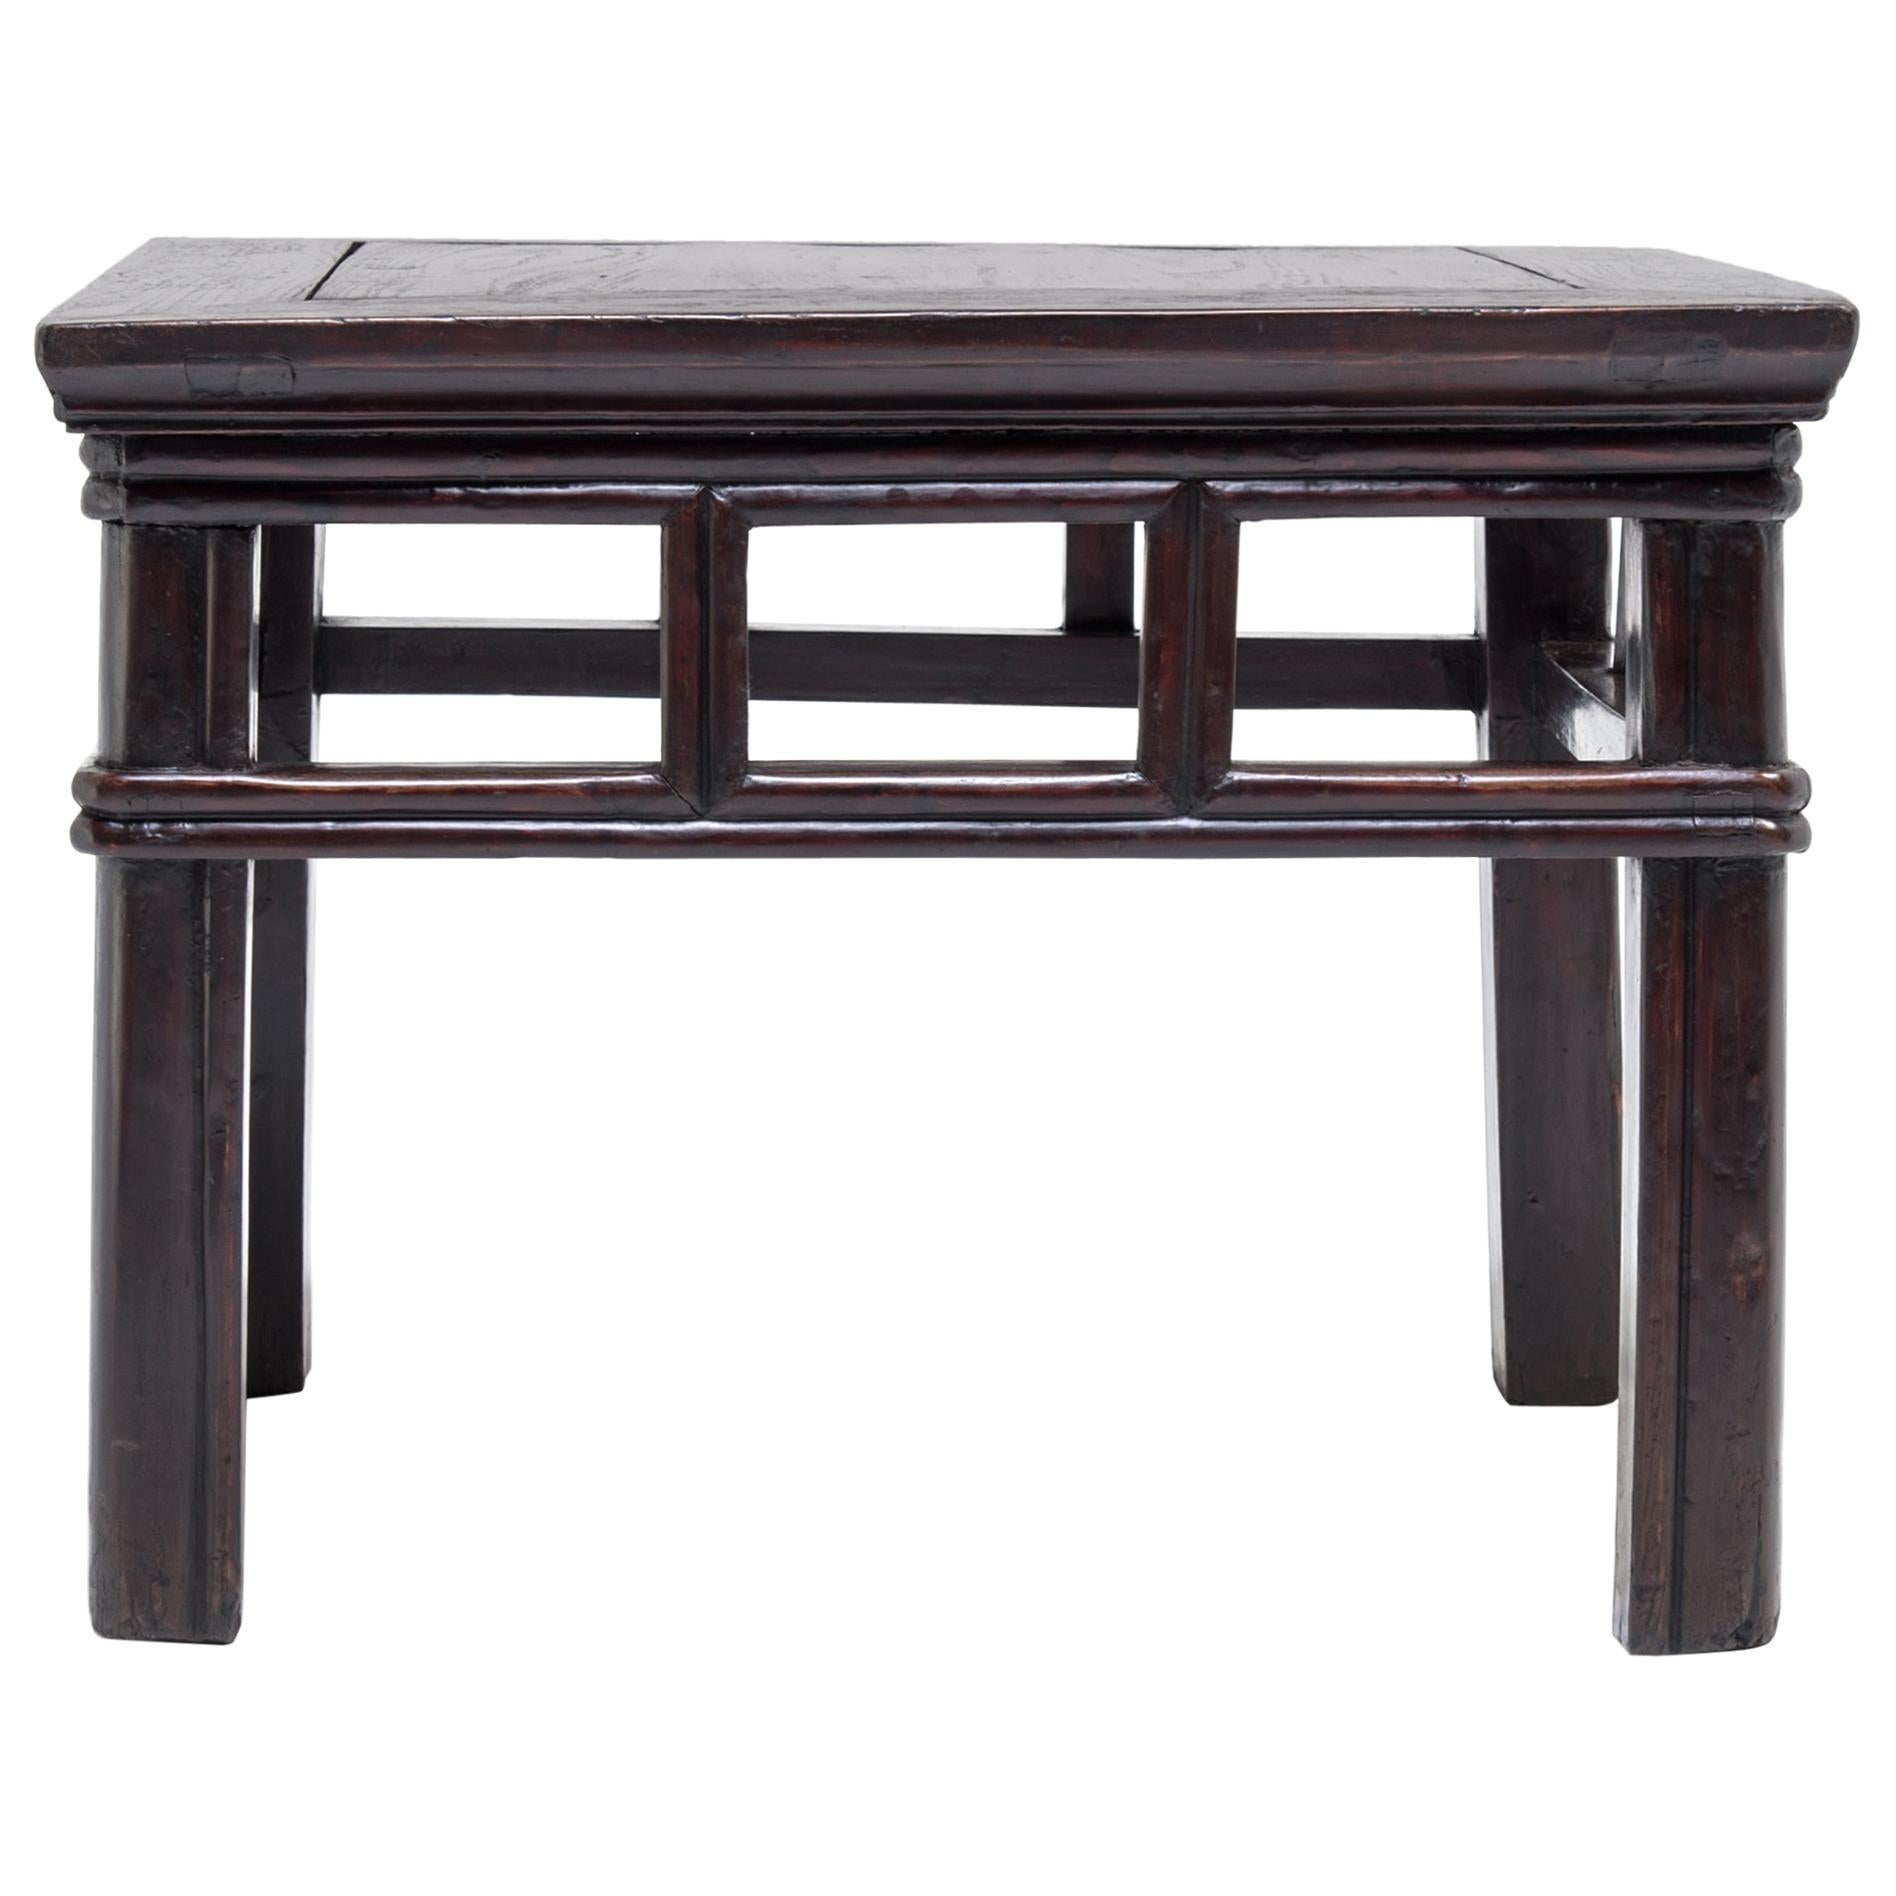 Chinese Black Lacquer Square Stool, c. 1850